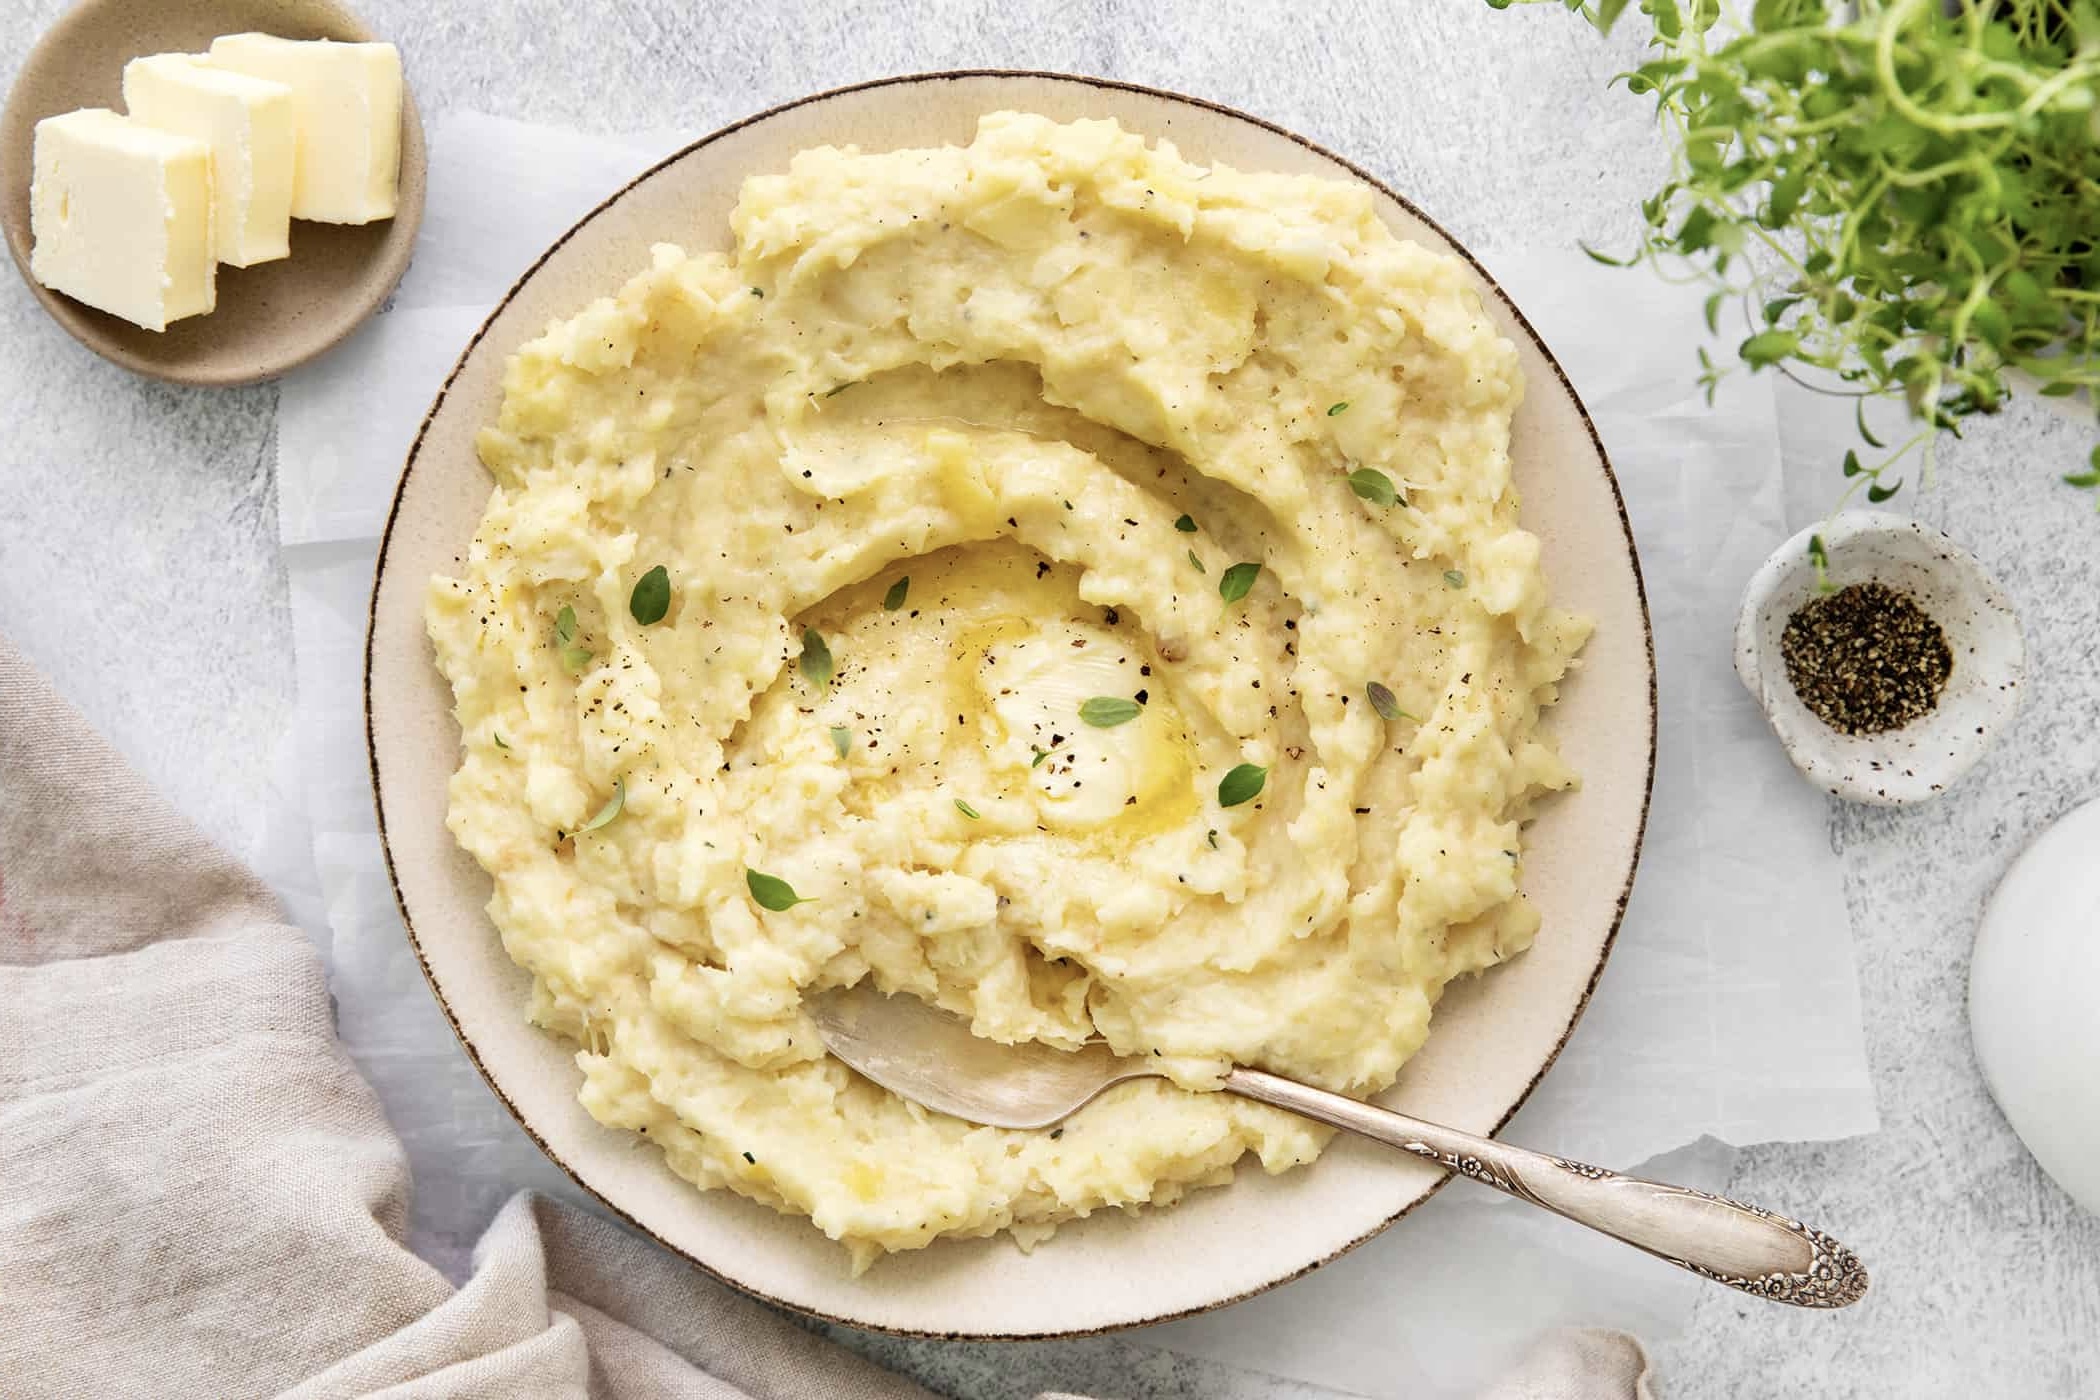 Whipped Parsnips with Roasted Garlic